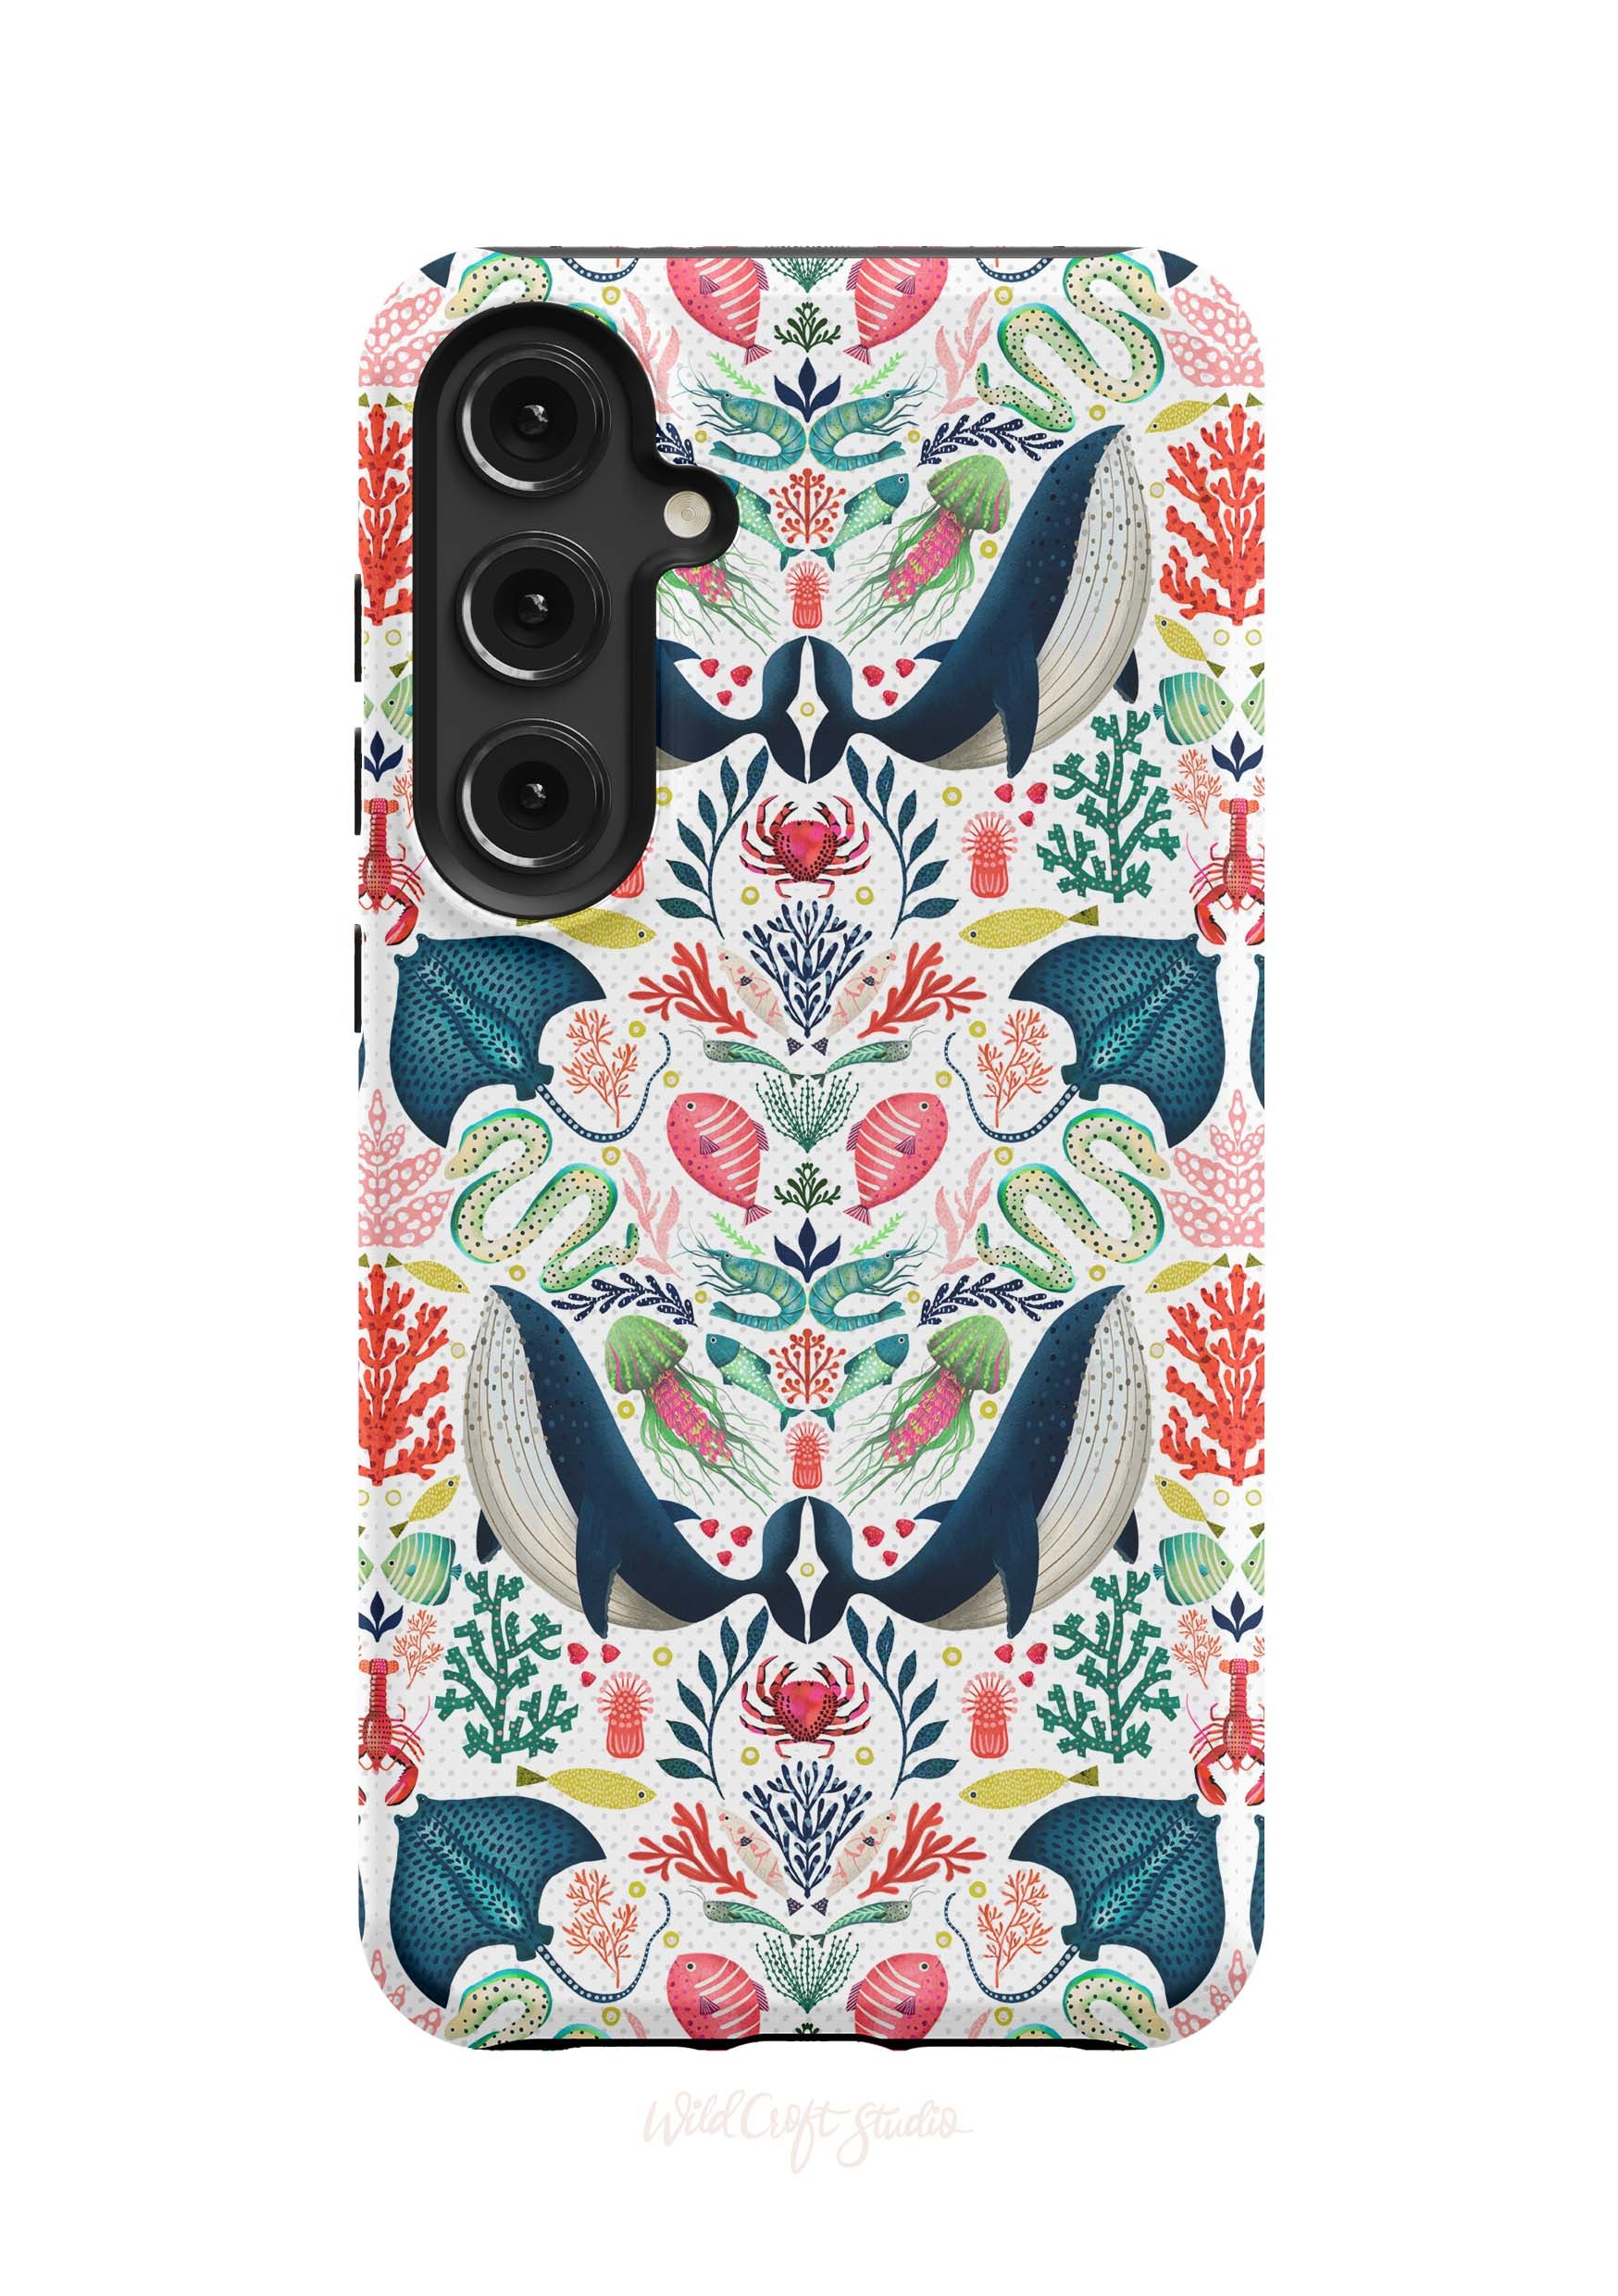 a phone case with a colorful pattern on it